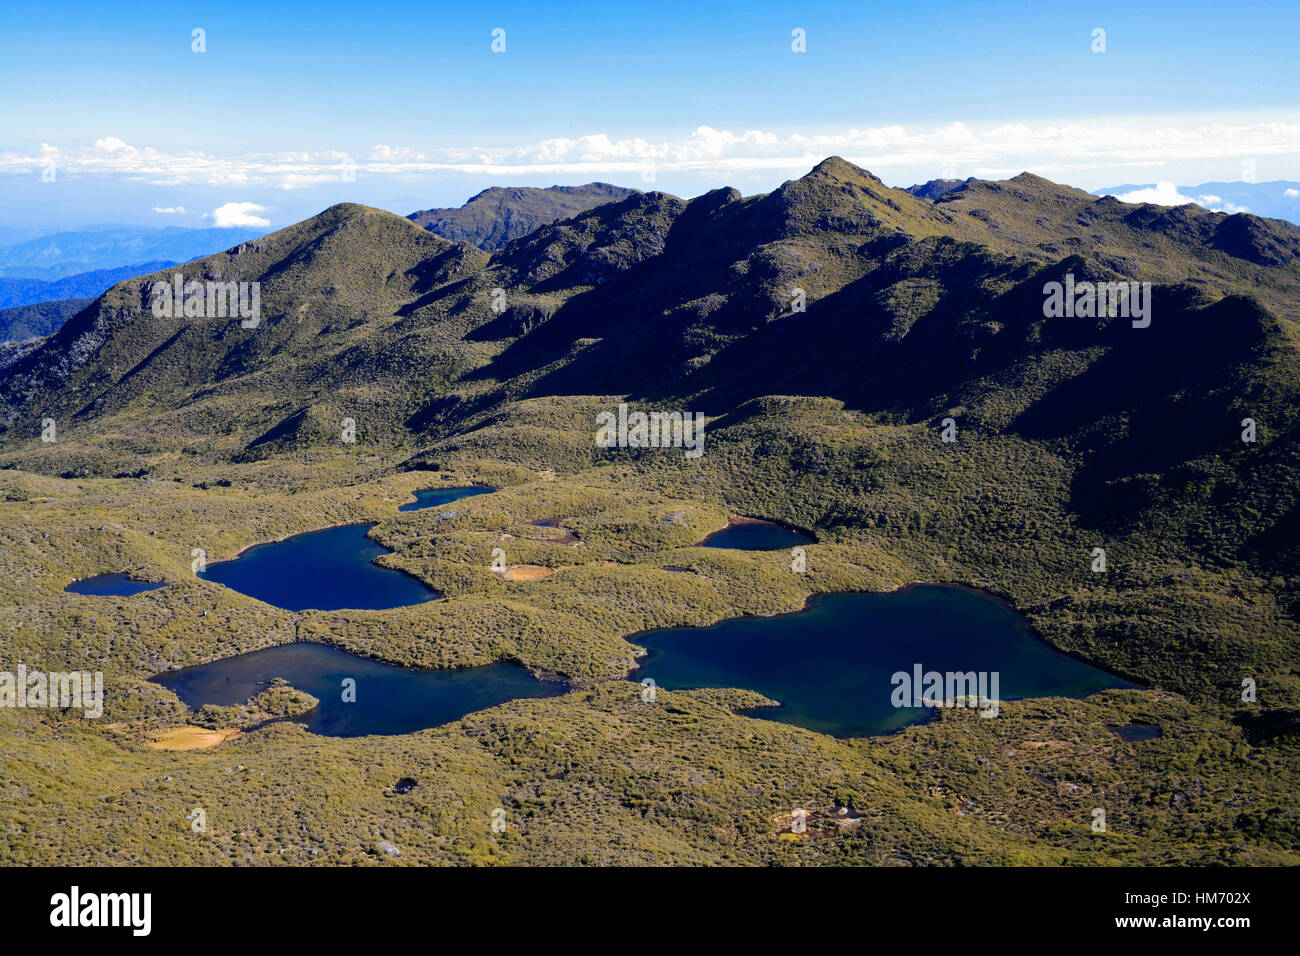 Lakes Las Morenas seen from summit of Mount Chirripo, Costa Rica’s highest mountain – 3820m. Chirripo National Park, Costa Rica. Stock Photo